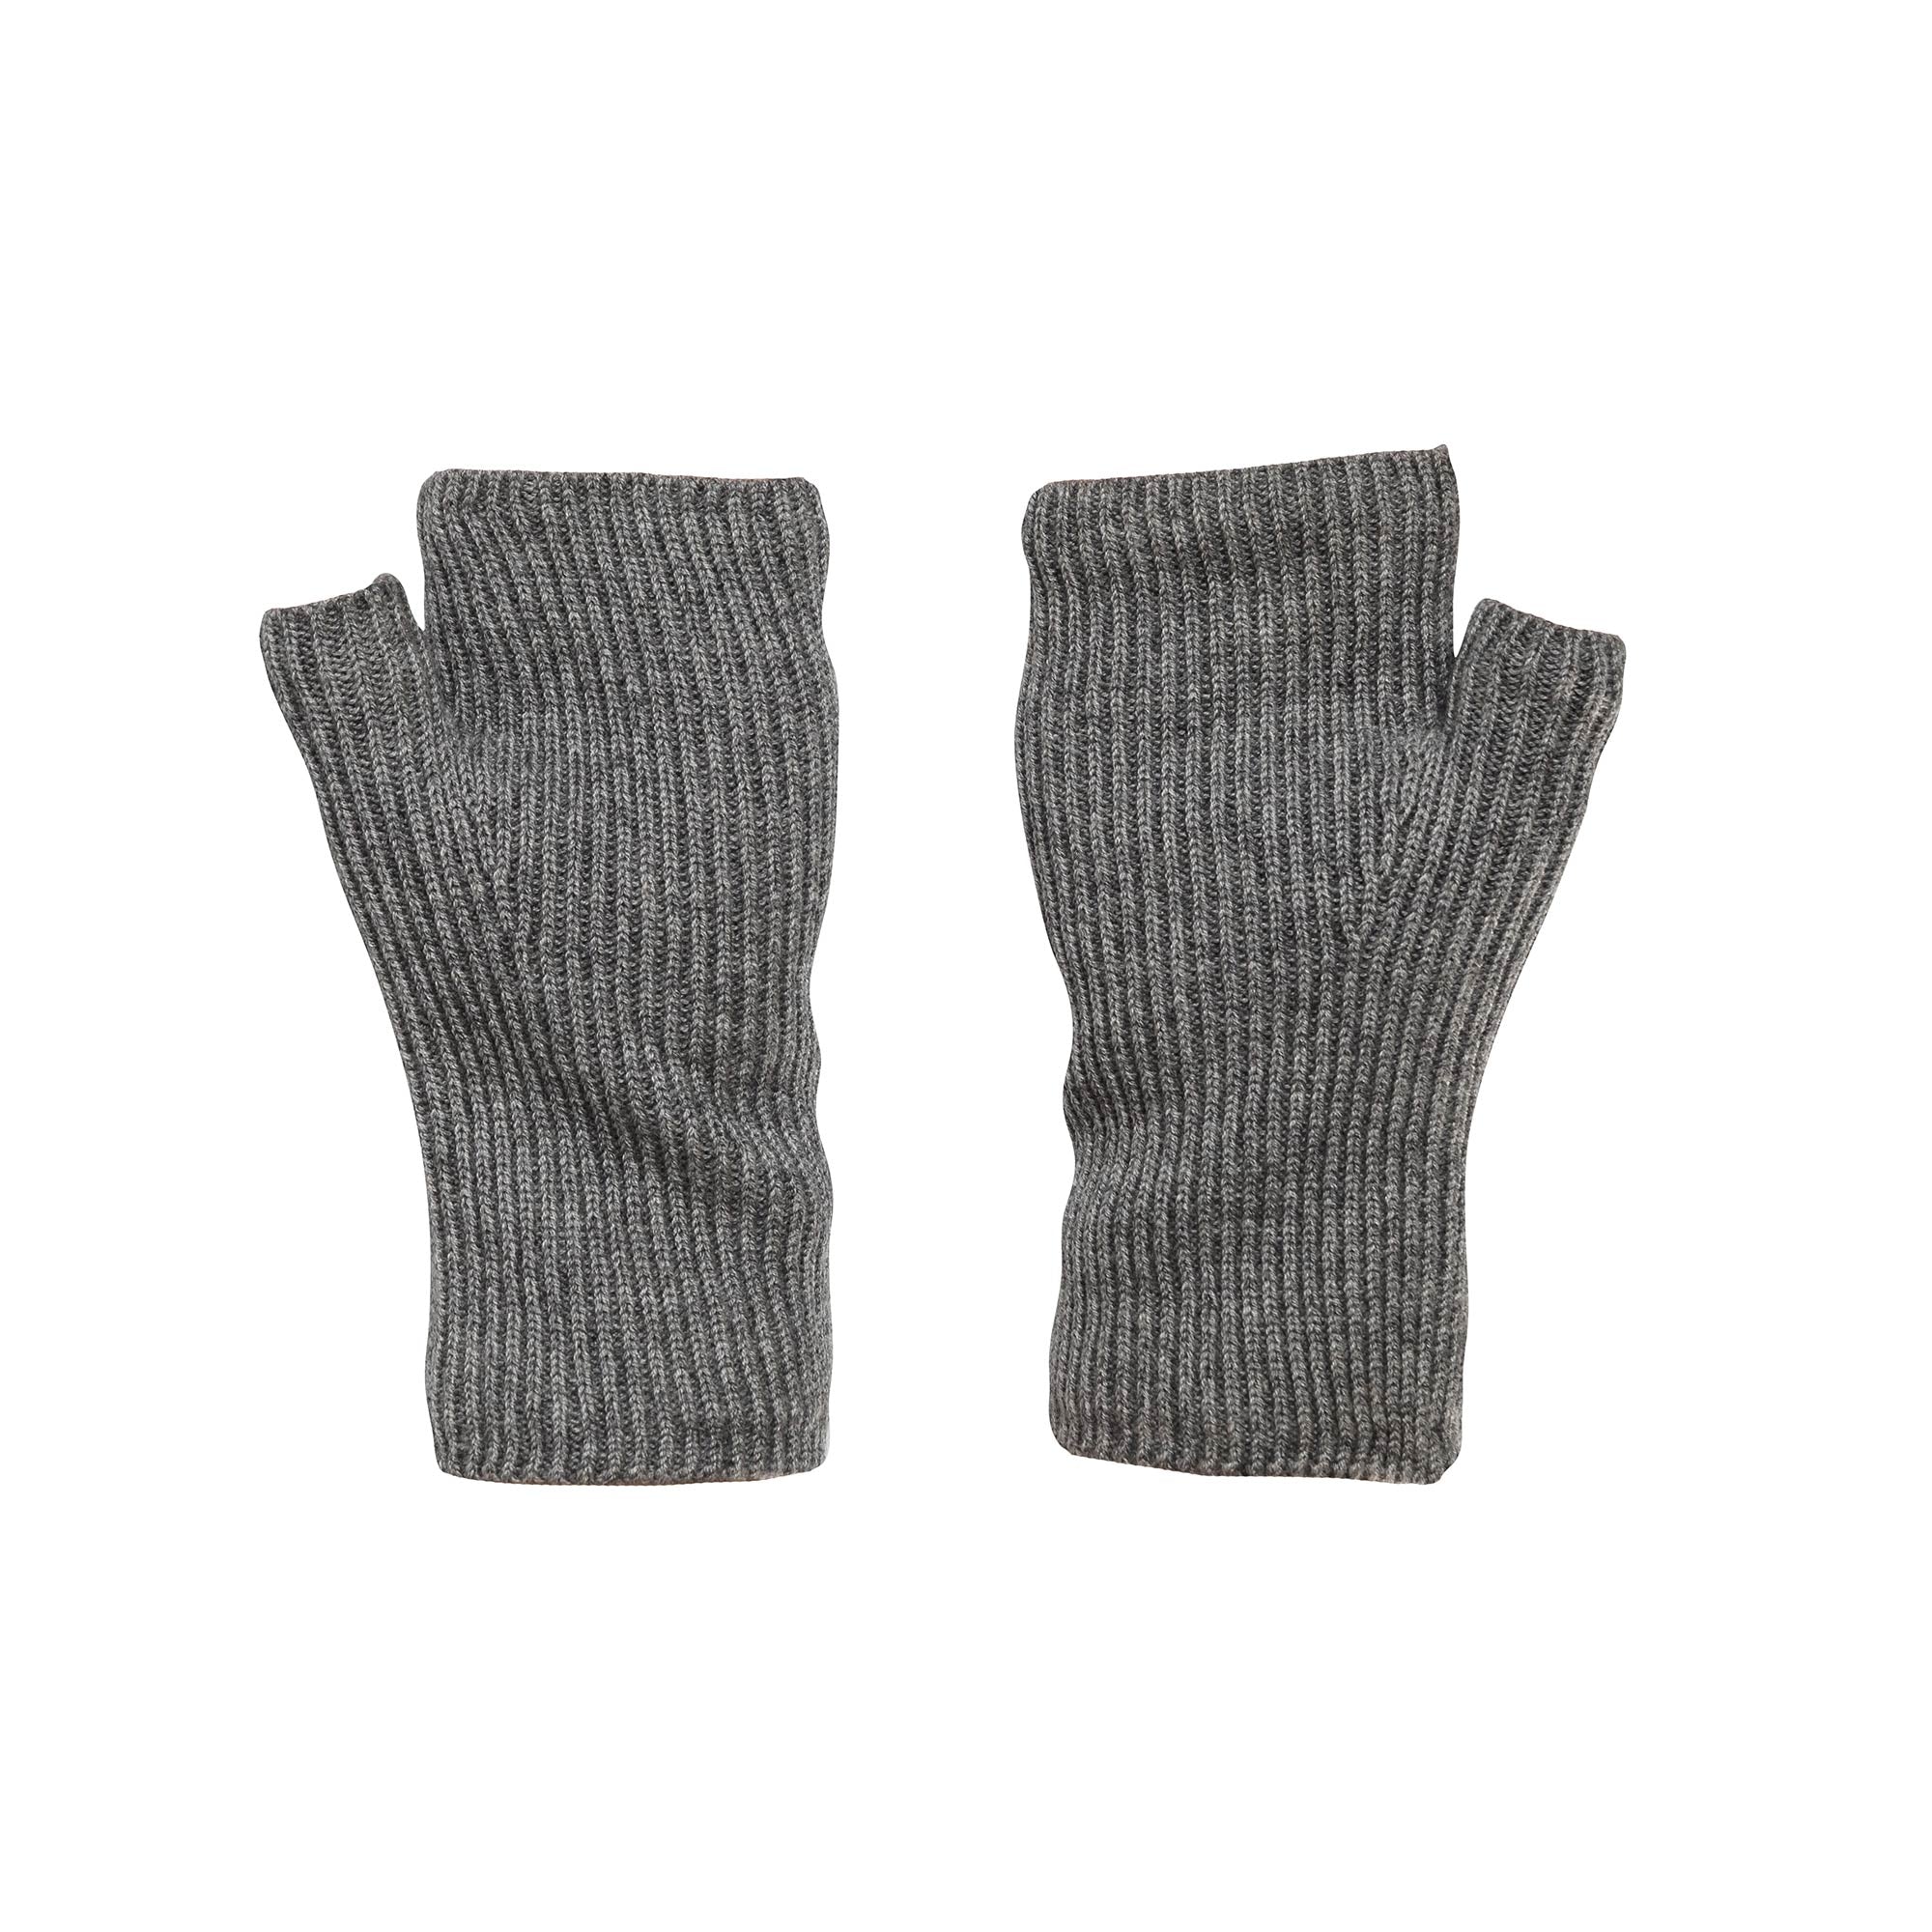 "Ash" knitted wrist gaiters